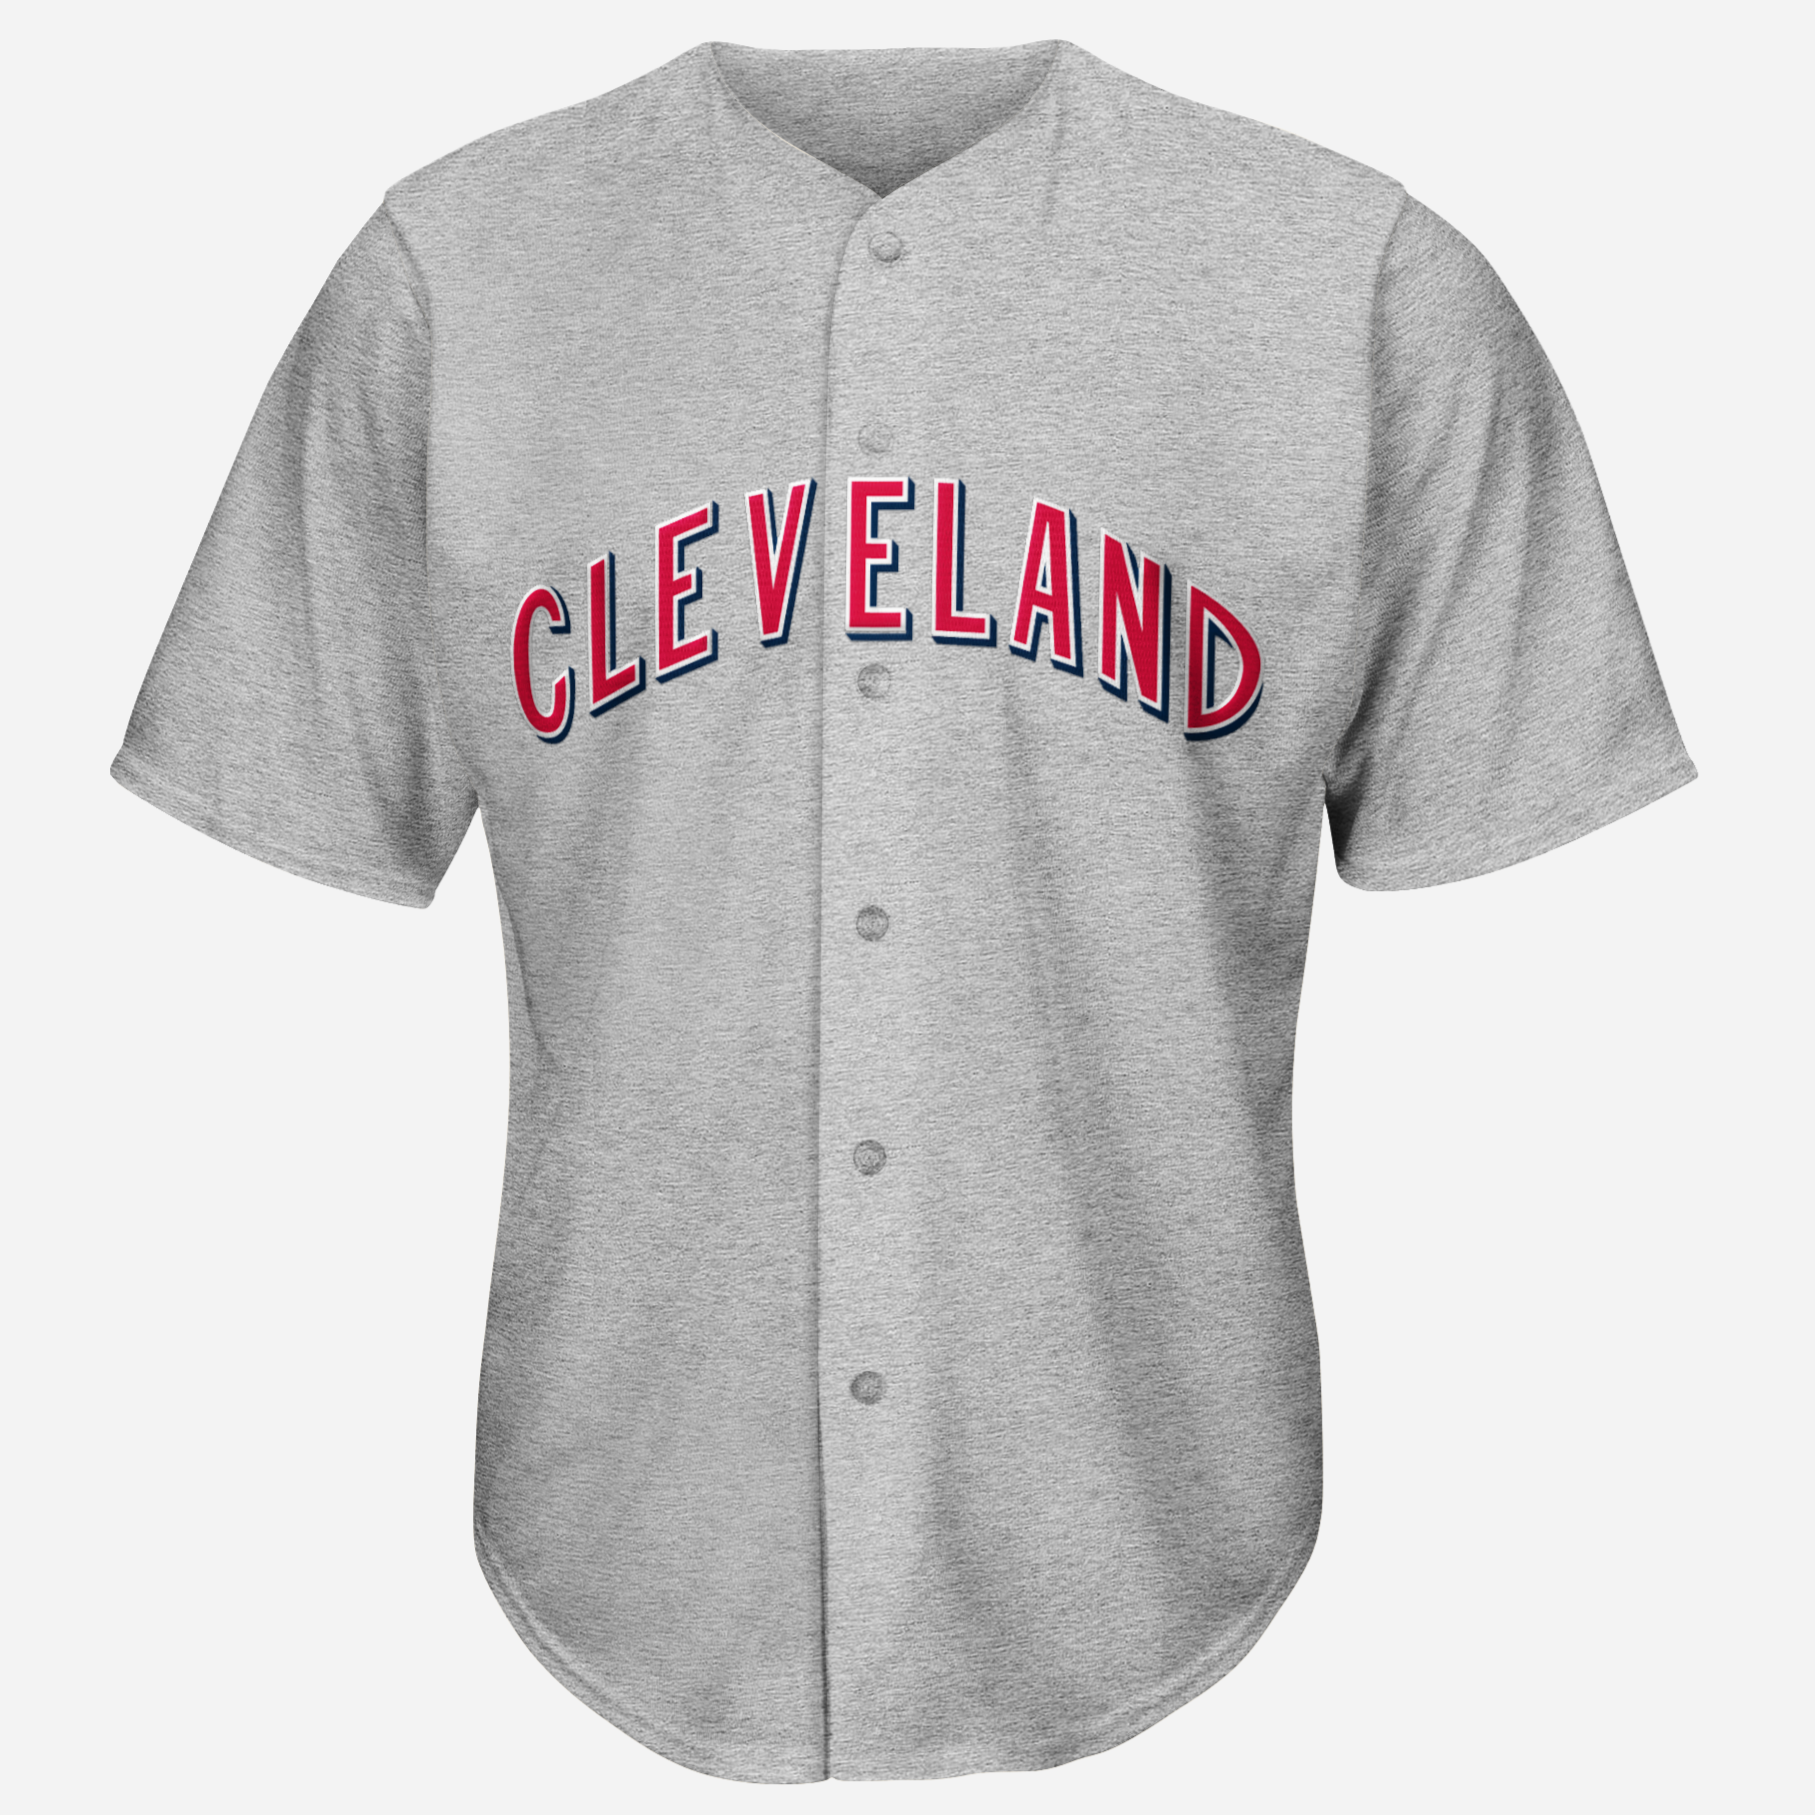 1920 cleveland indians jersey